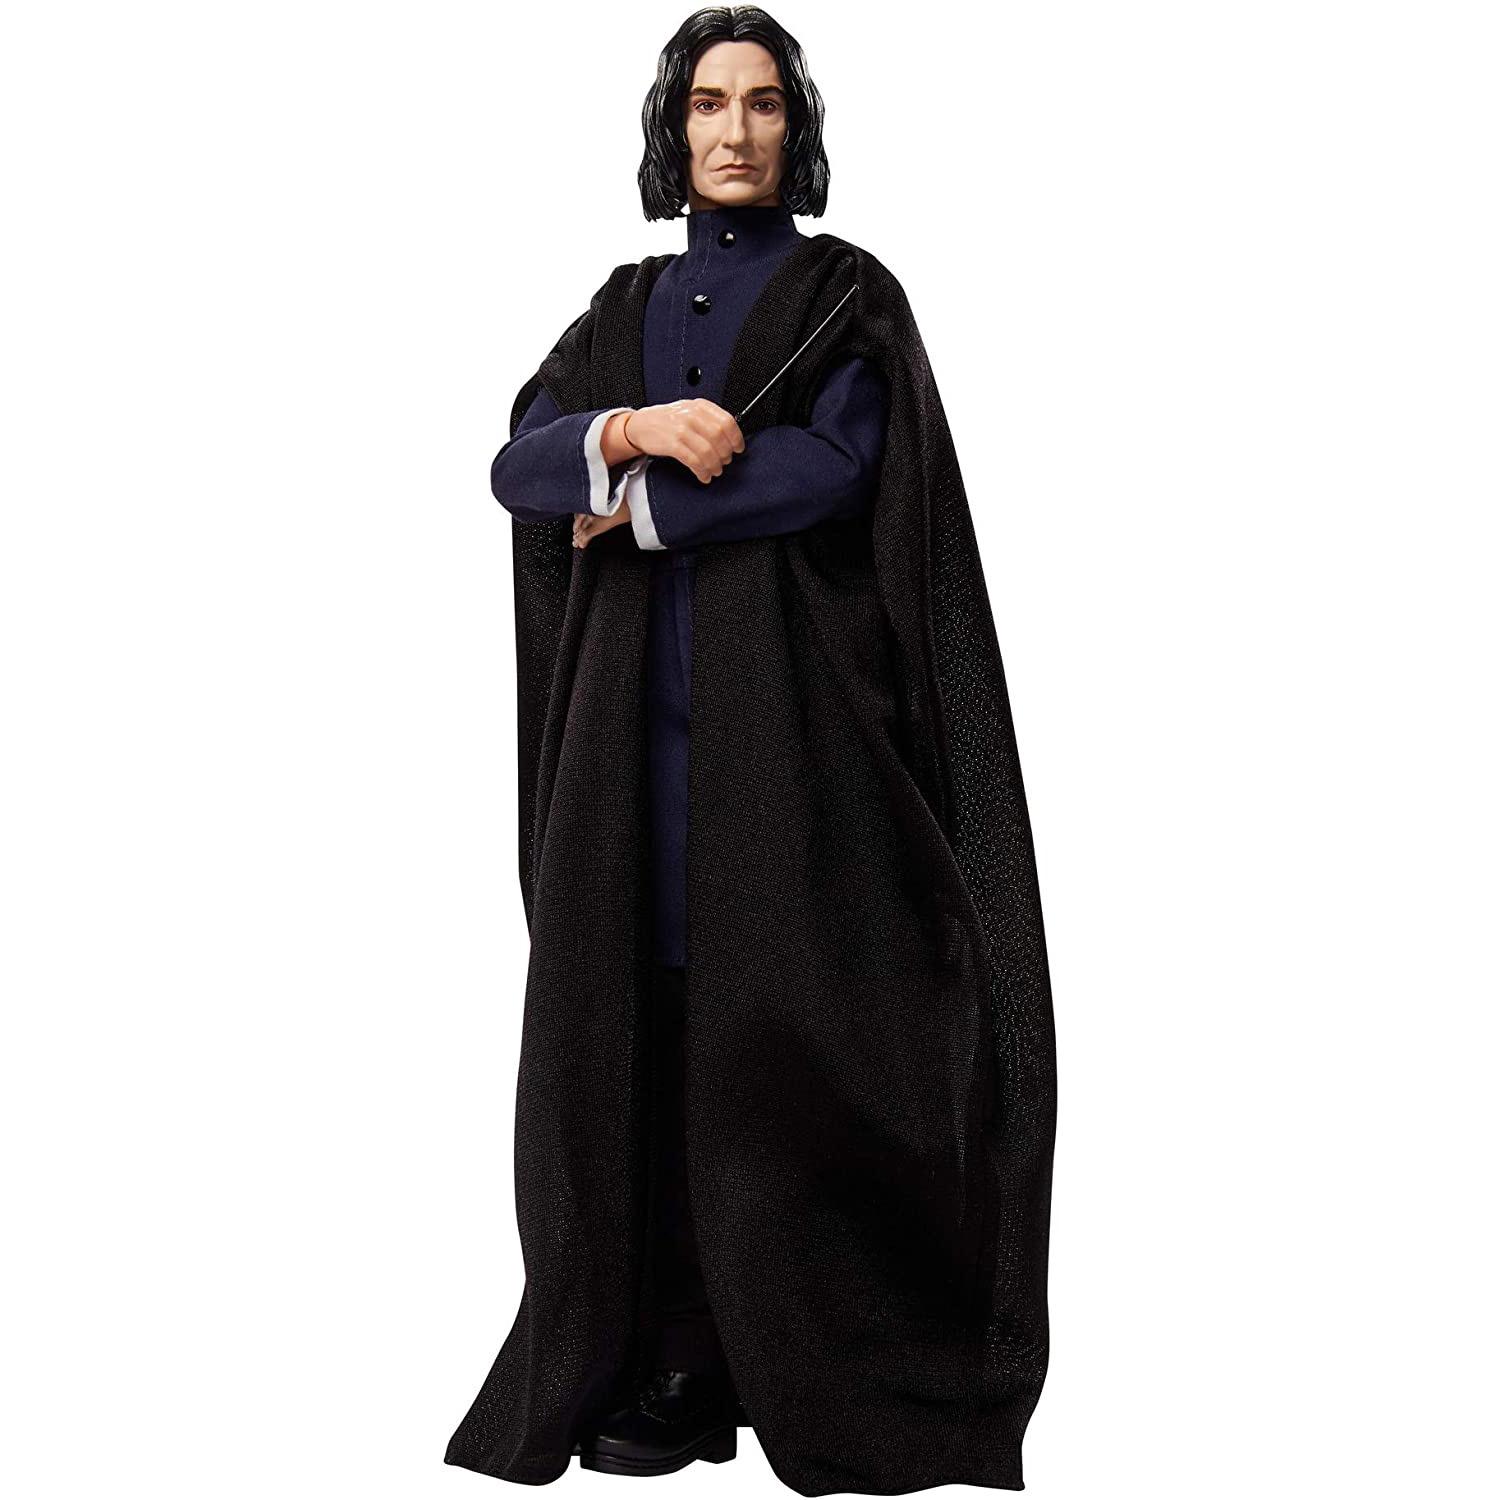 12in Harry Potter Collectible Severus Snape Doll for $9.88